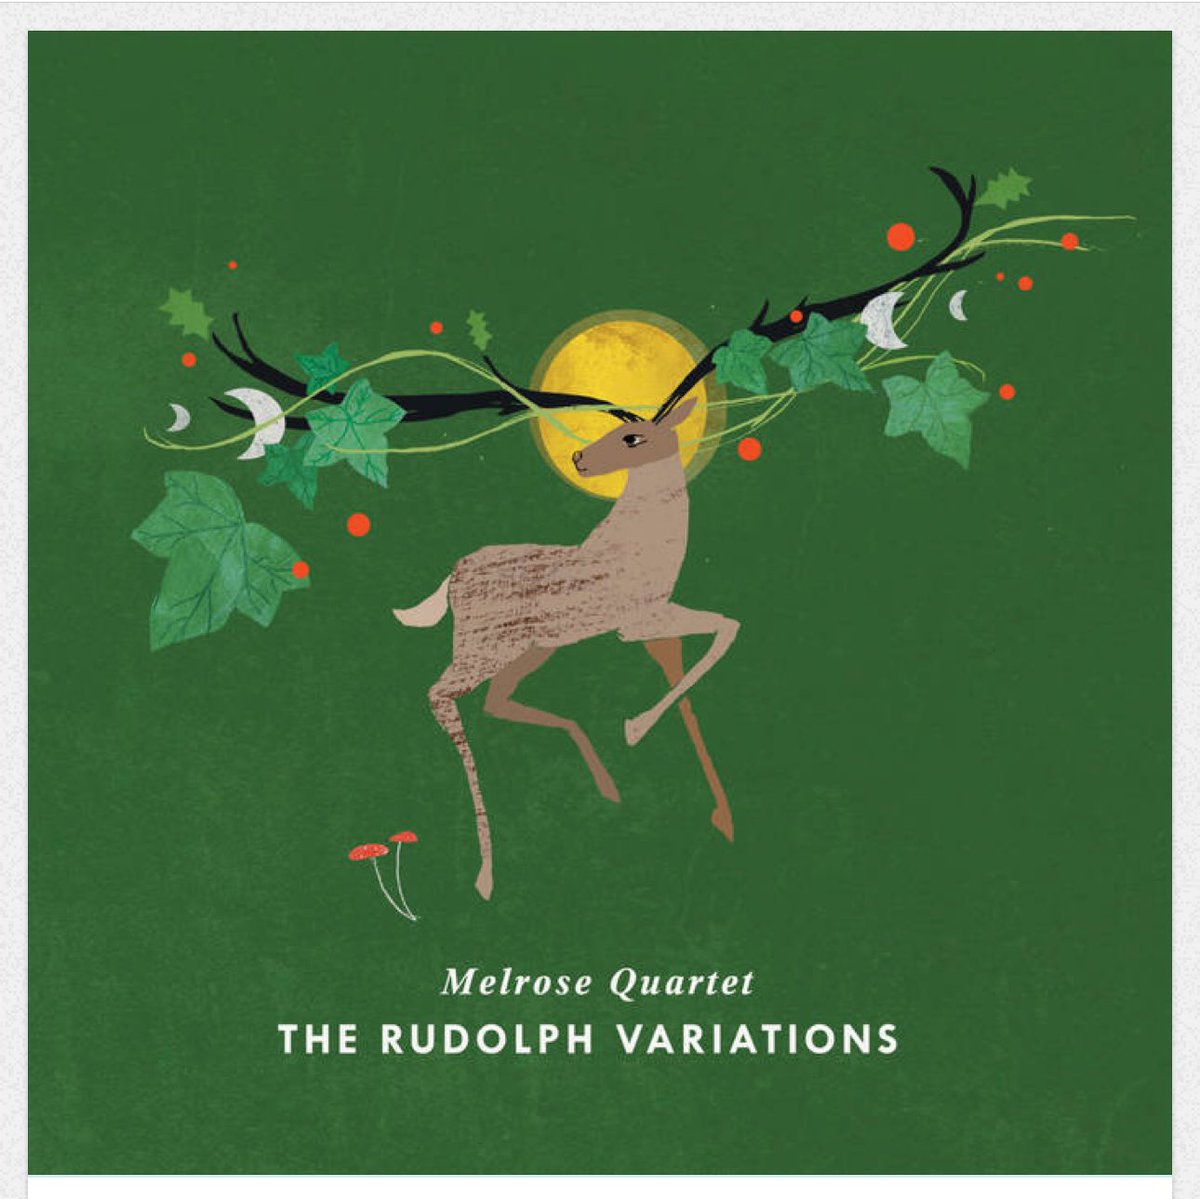 Last minute Christmas gift? All you need is your friend’s email and you can send them this today! melrosequartet.bandcamp.com/album/the-rudo…